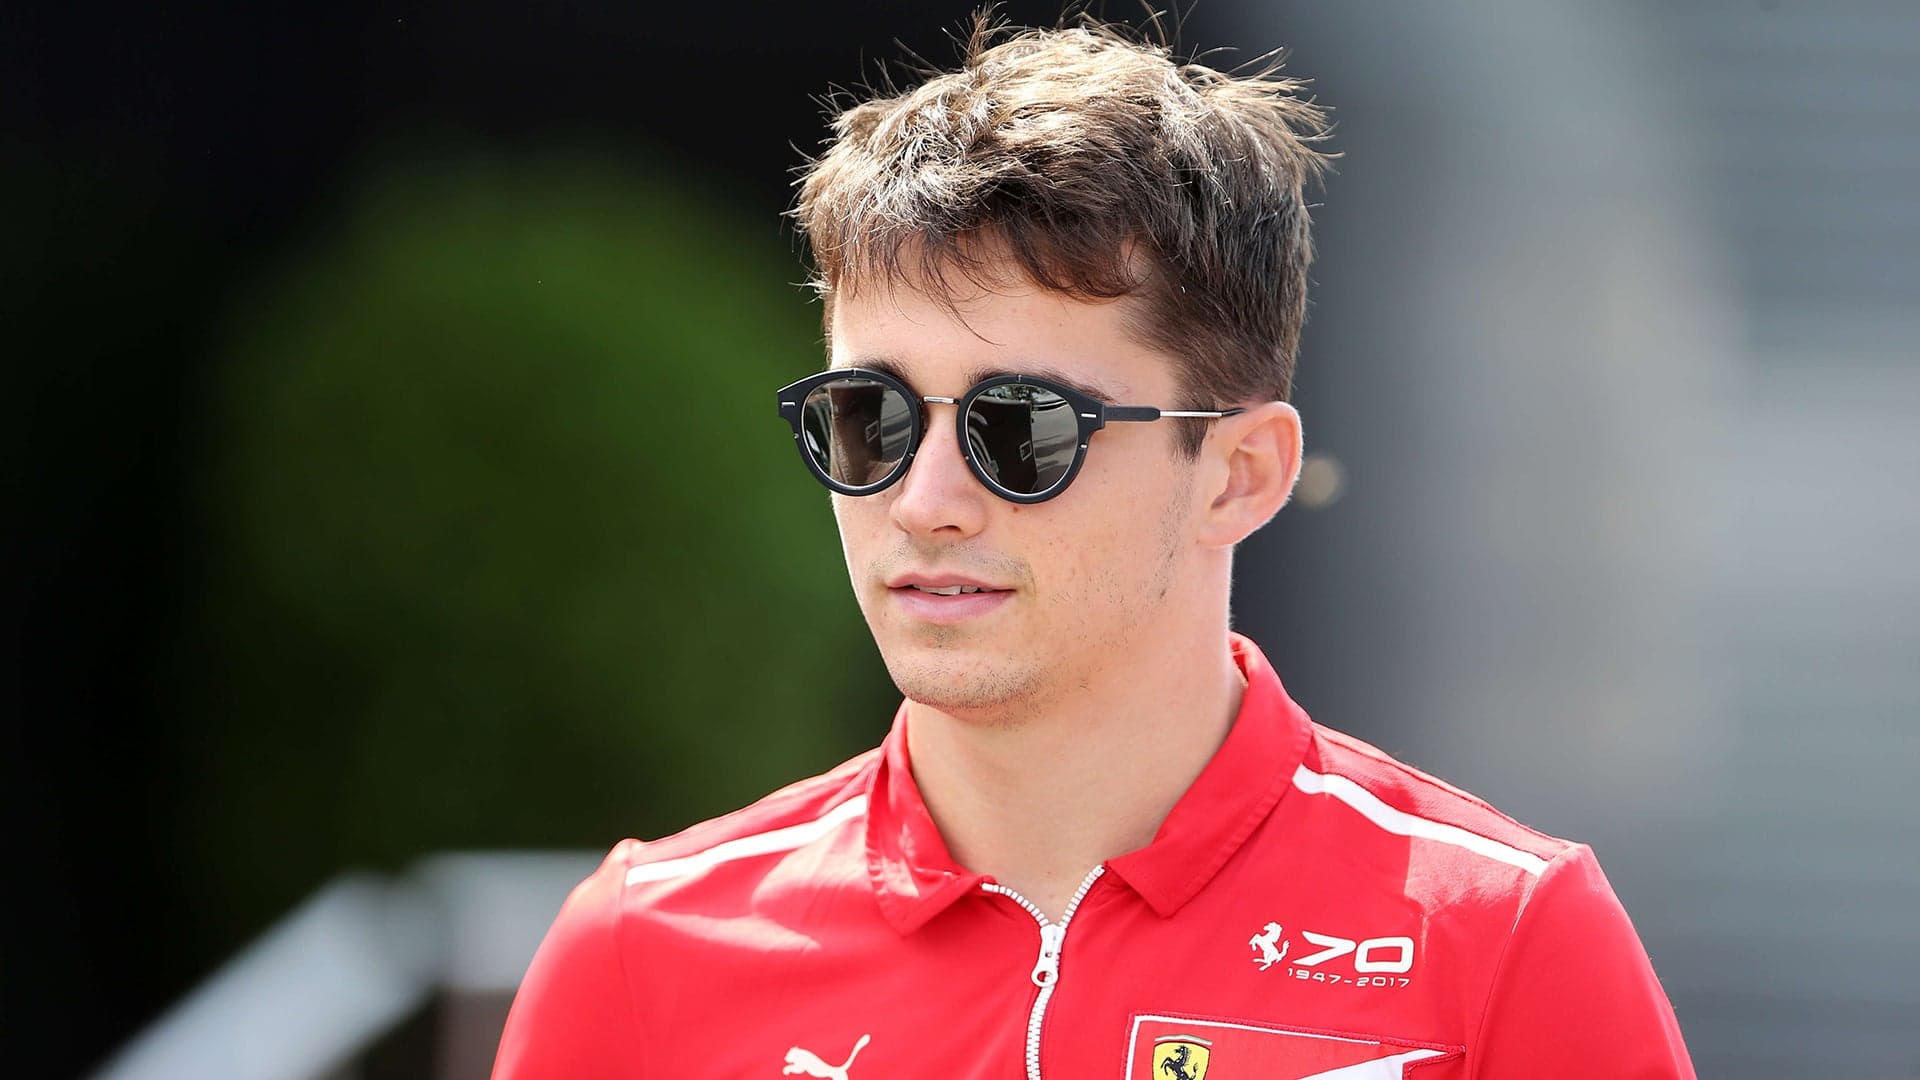 Charles Leclerc’s F1 Practice Drives at Sauber Are Confirmed